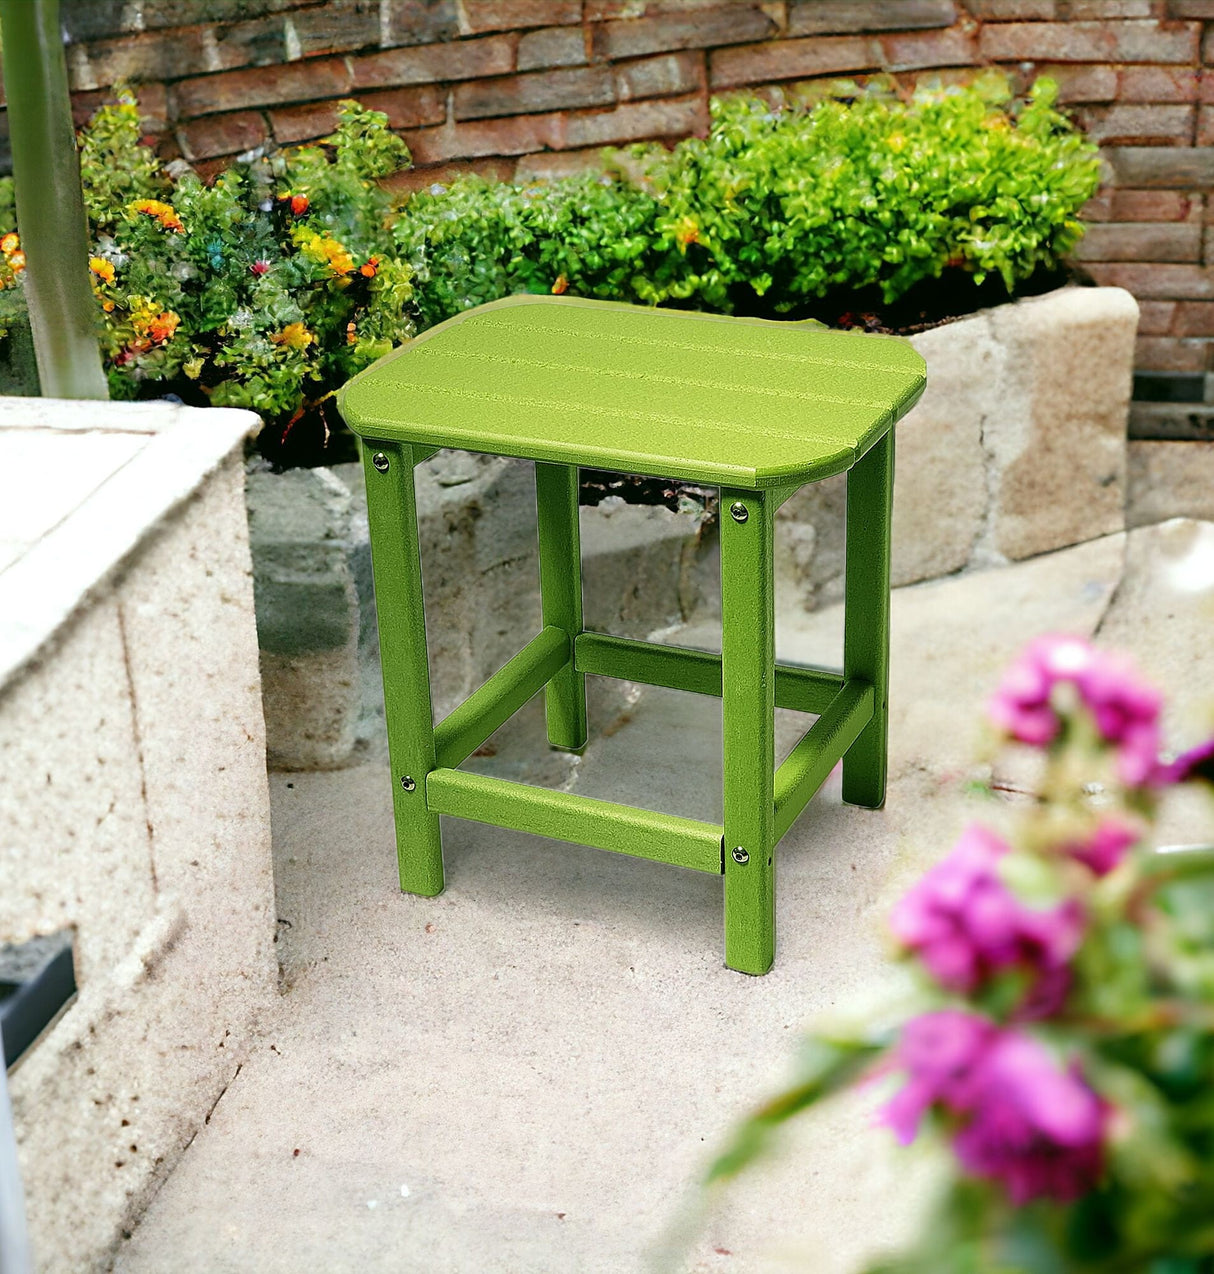 13" Green Resin Outdoor Side Table